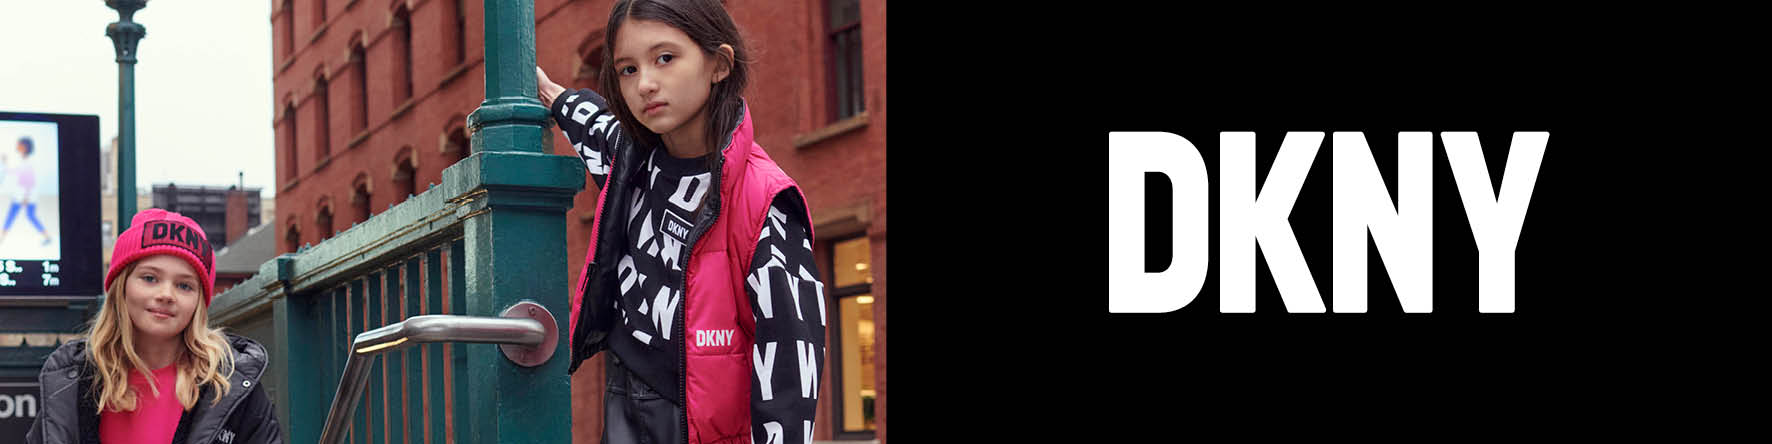 FW22 Banners 638x160px DKNY7